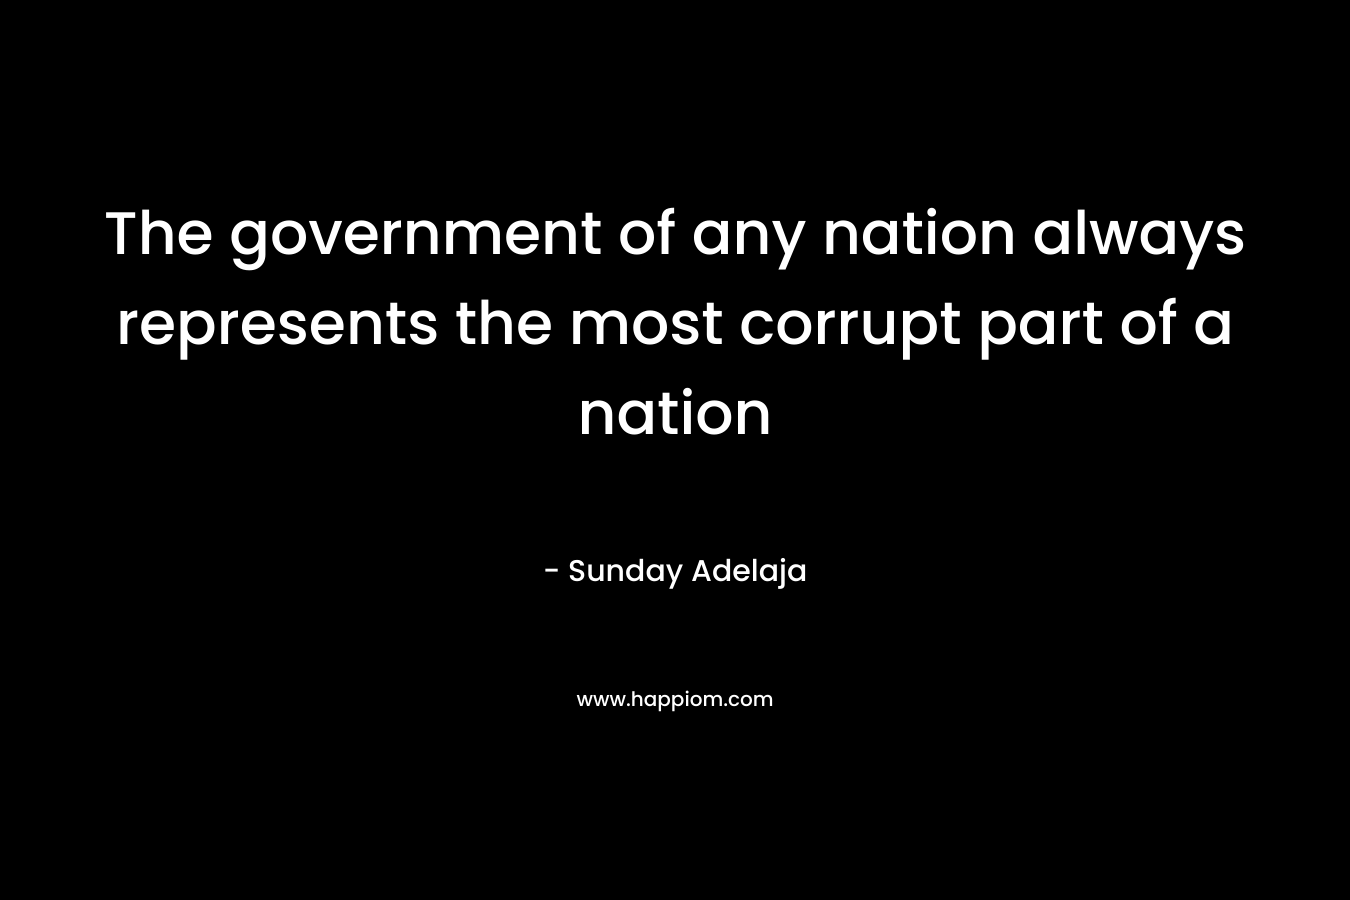 The government of any nation always represents the most corrupt part of a nation